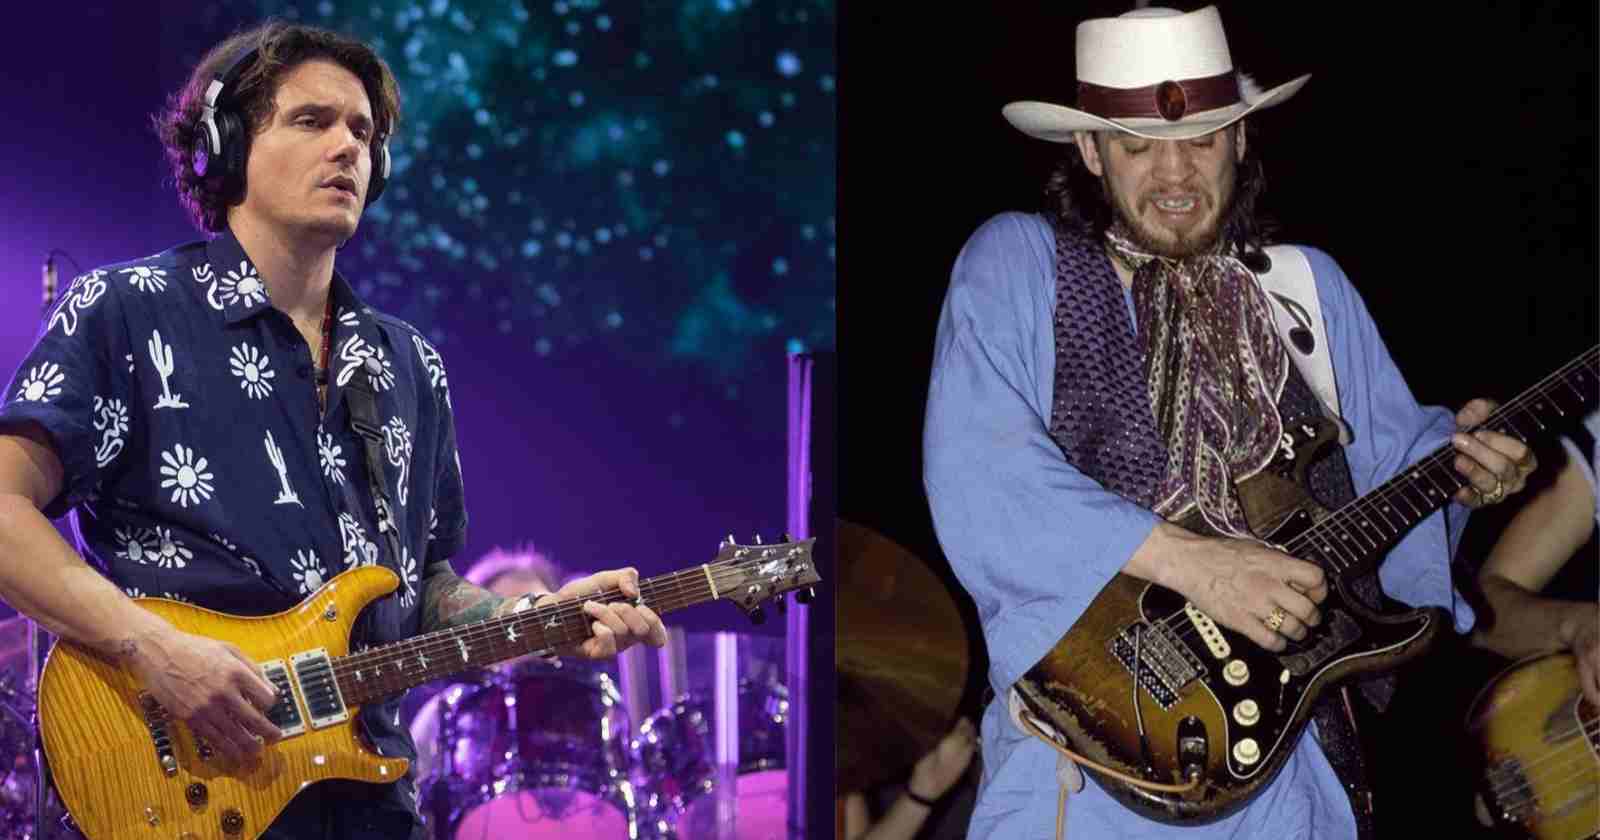 John Mayer talks about how Stevie Ray Vaughan influenced him